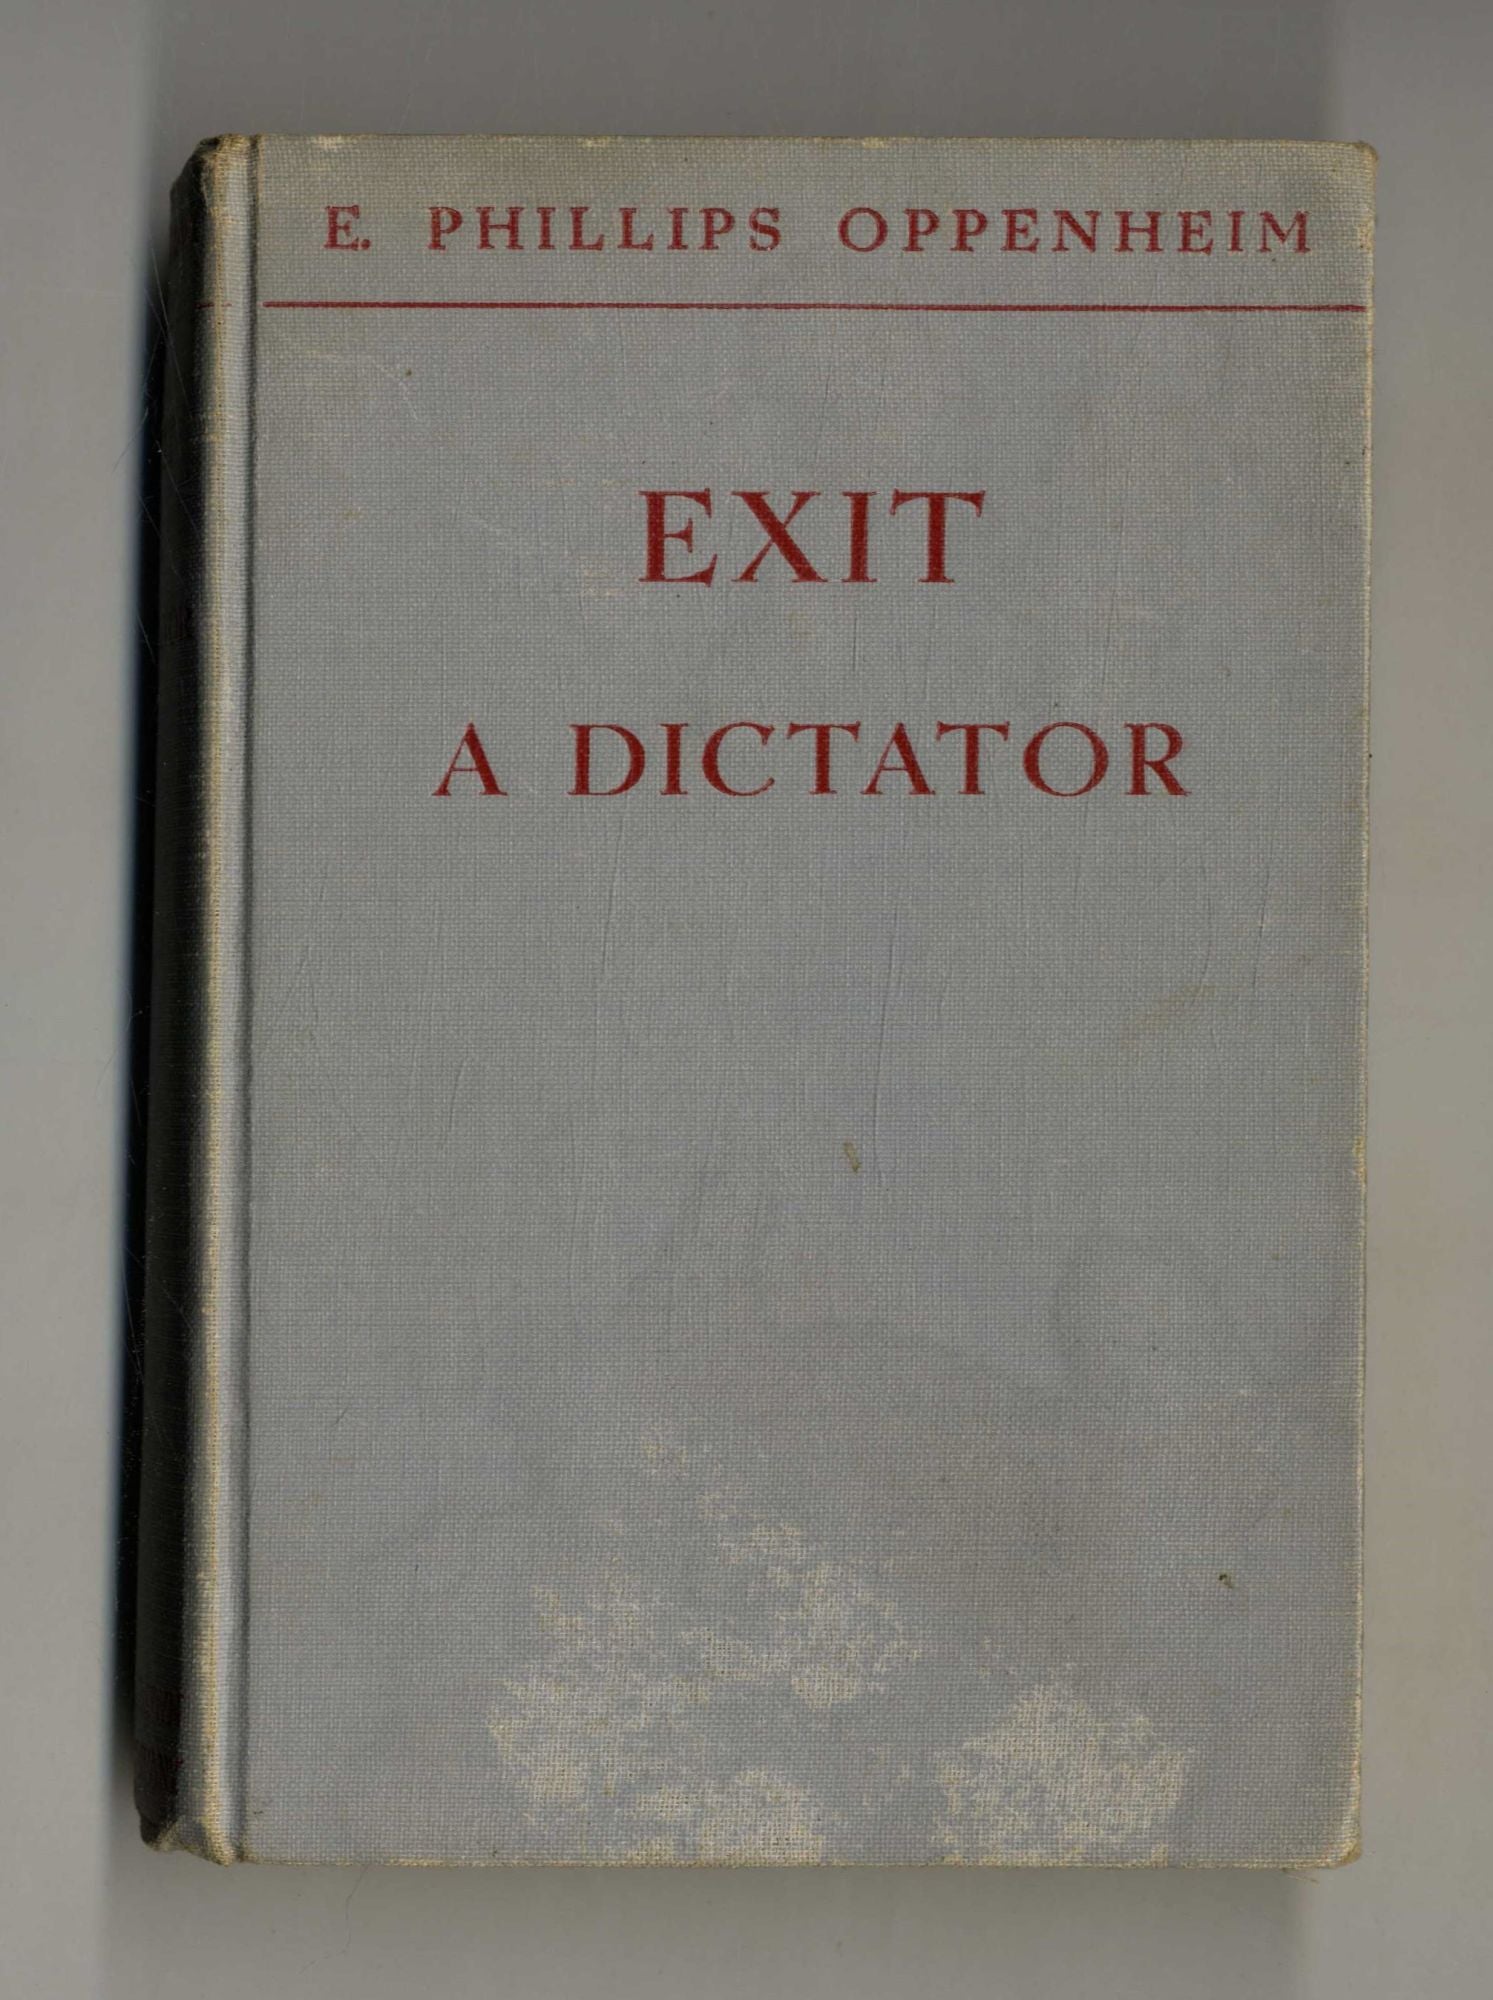 Book #160292 Exit a Dictator 1st Edition/1st Printing. E. Phillips Oppenheim.